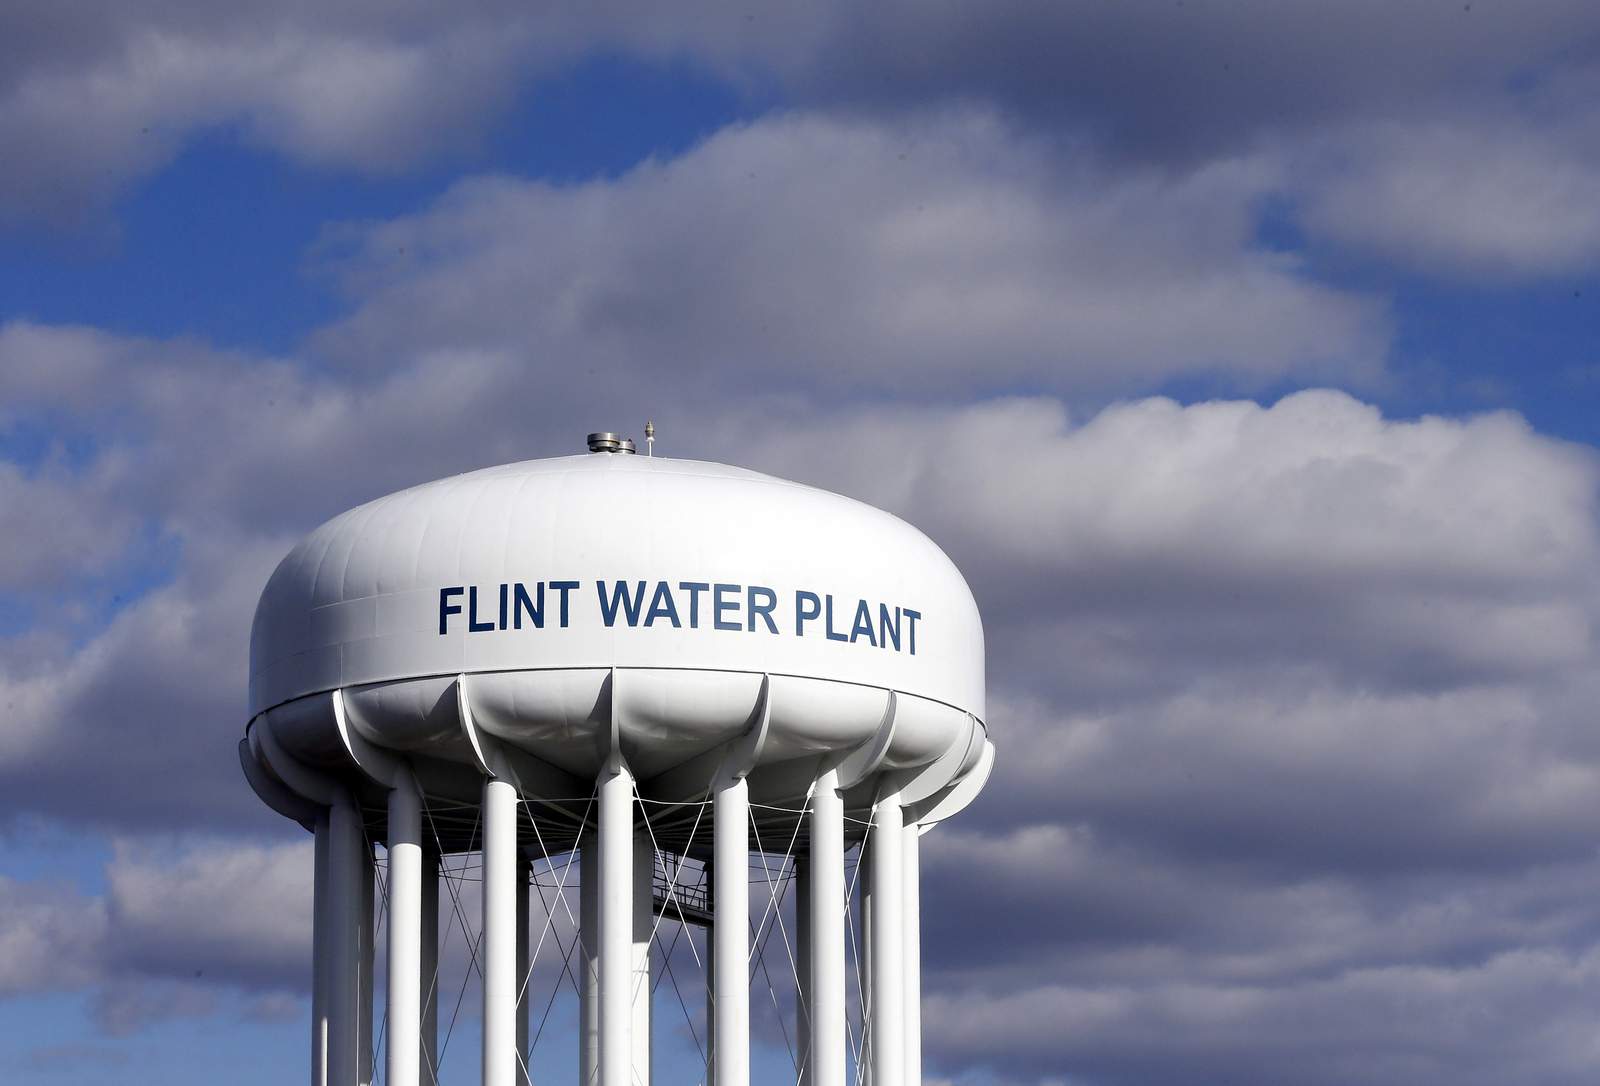 Flint families welcome water crisis charges, seek healing